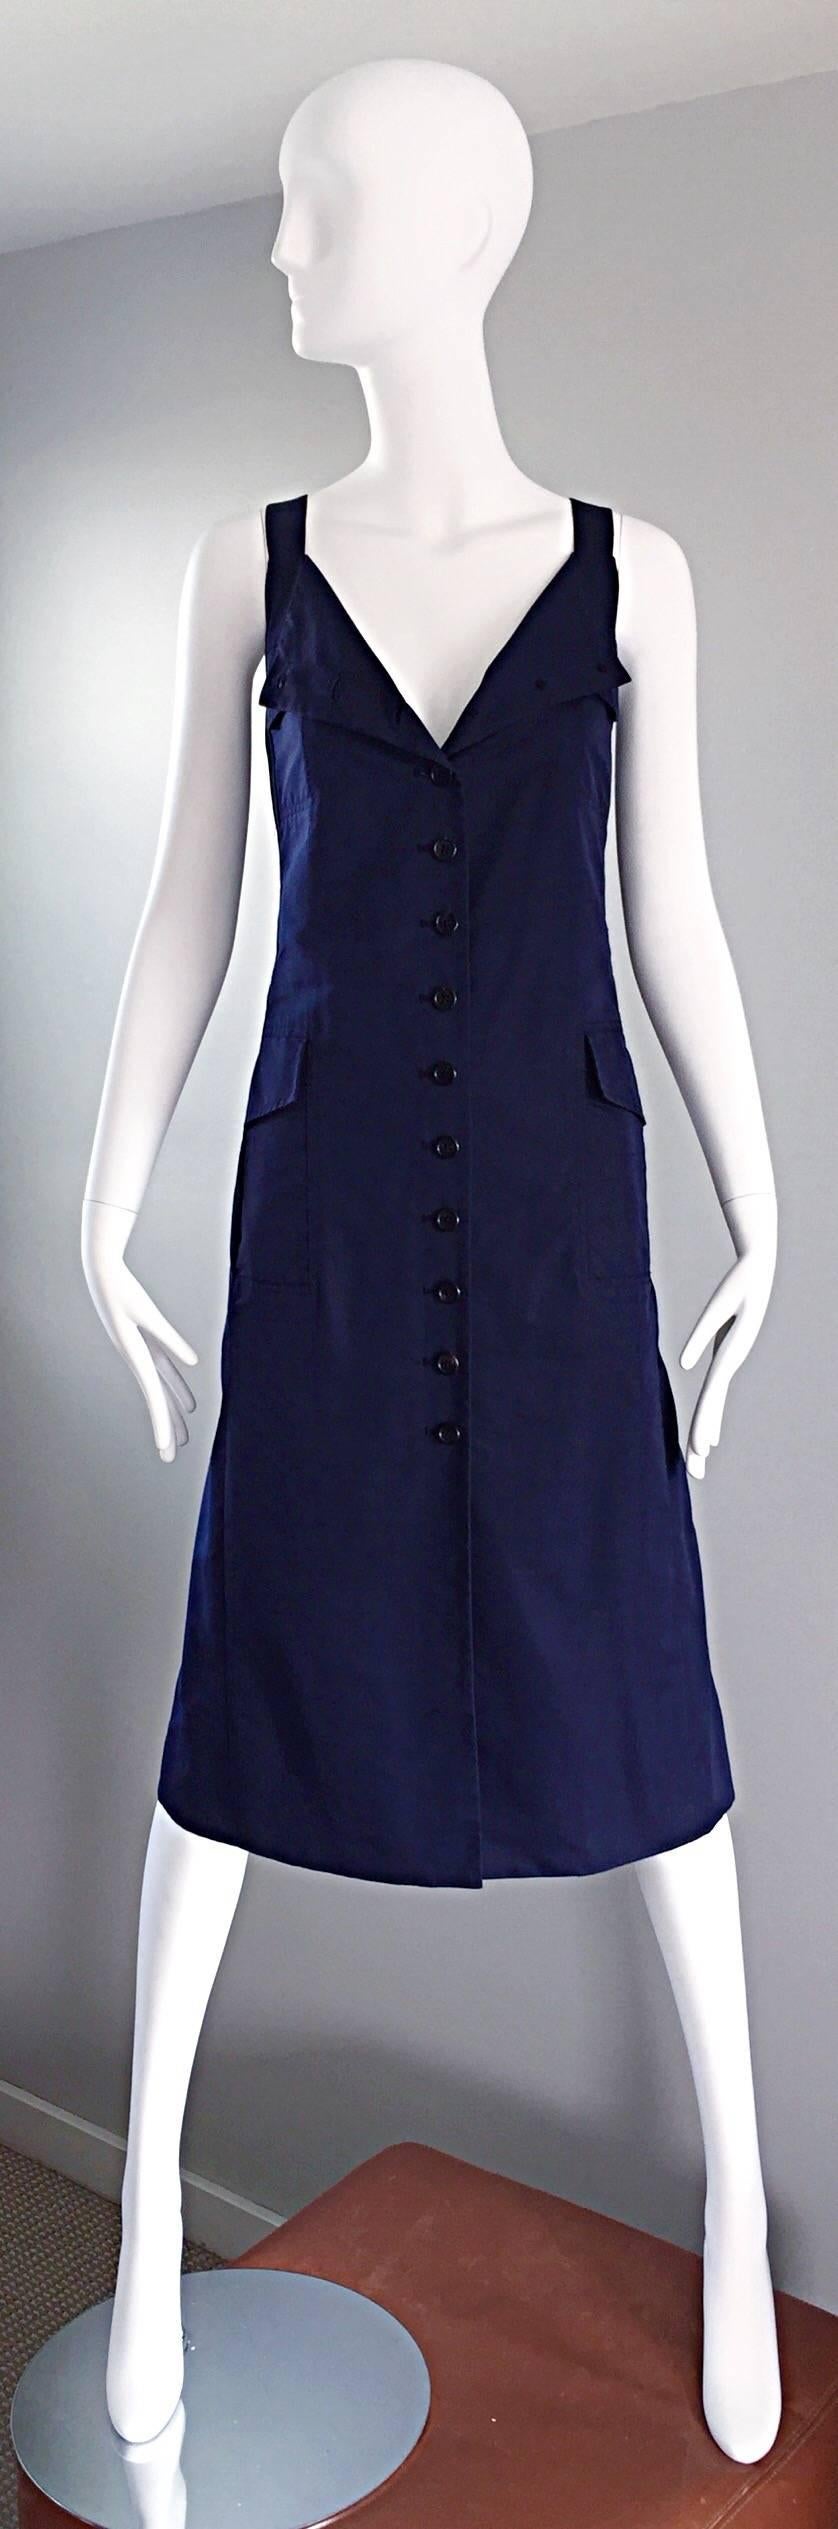 A rare early MARC JACOBS navy blue runway early 90s parachute cargo dress! Features functional buttons all the way up the front of the dress. Can be worn all the way buttoned up, or left partially open. Four cargo pockets on the front. Parachute